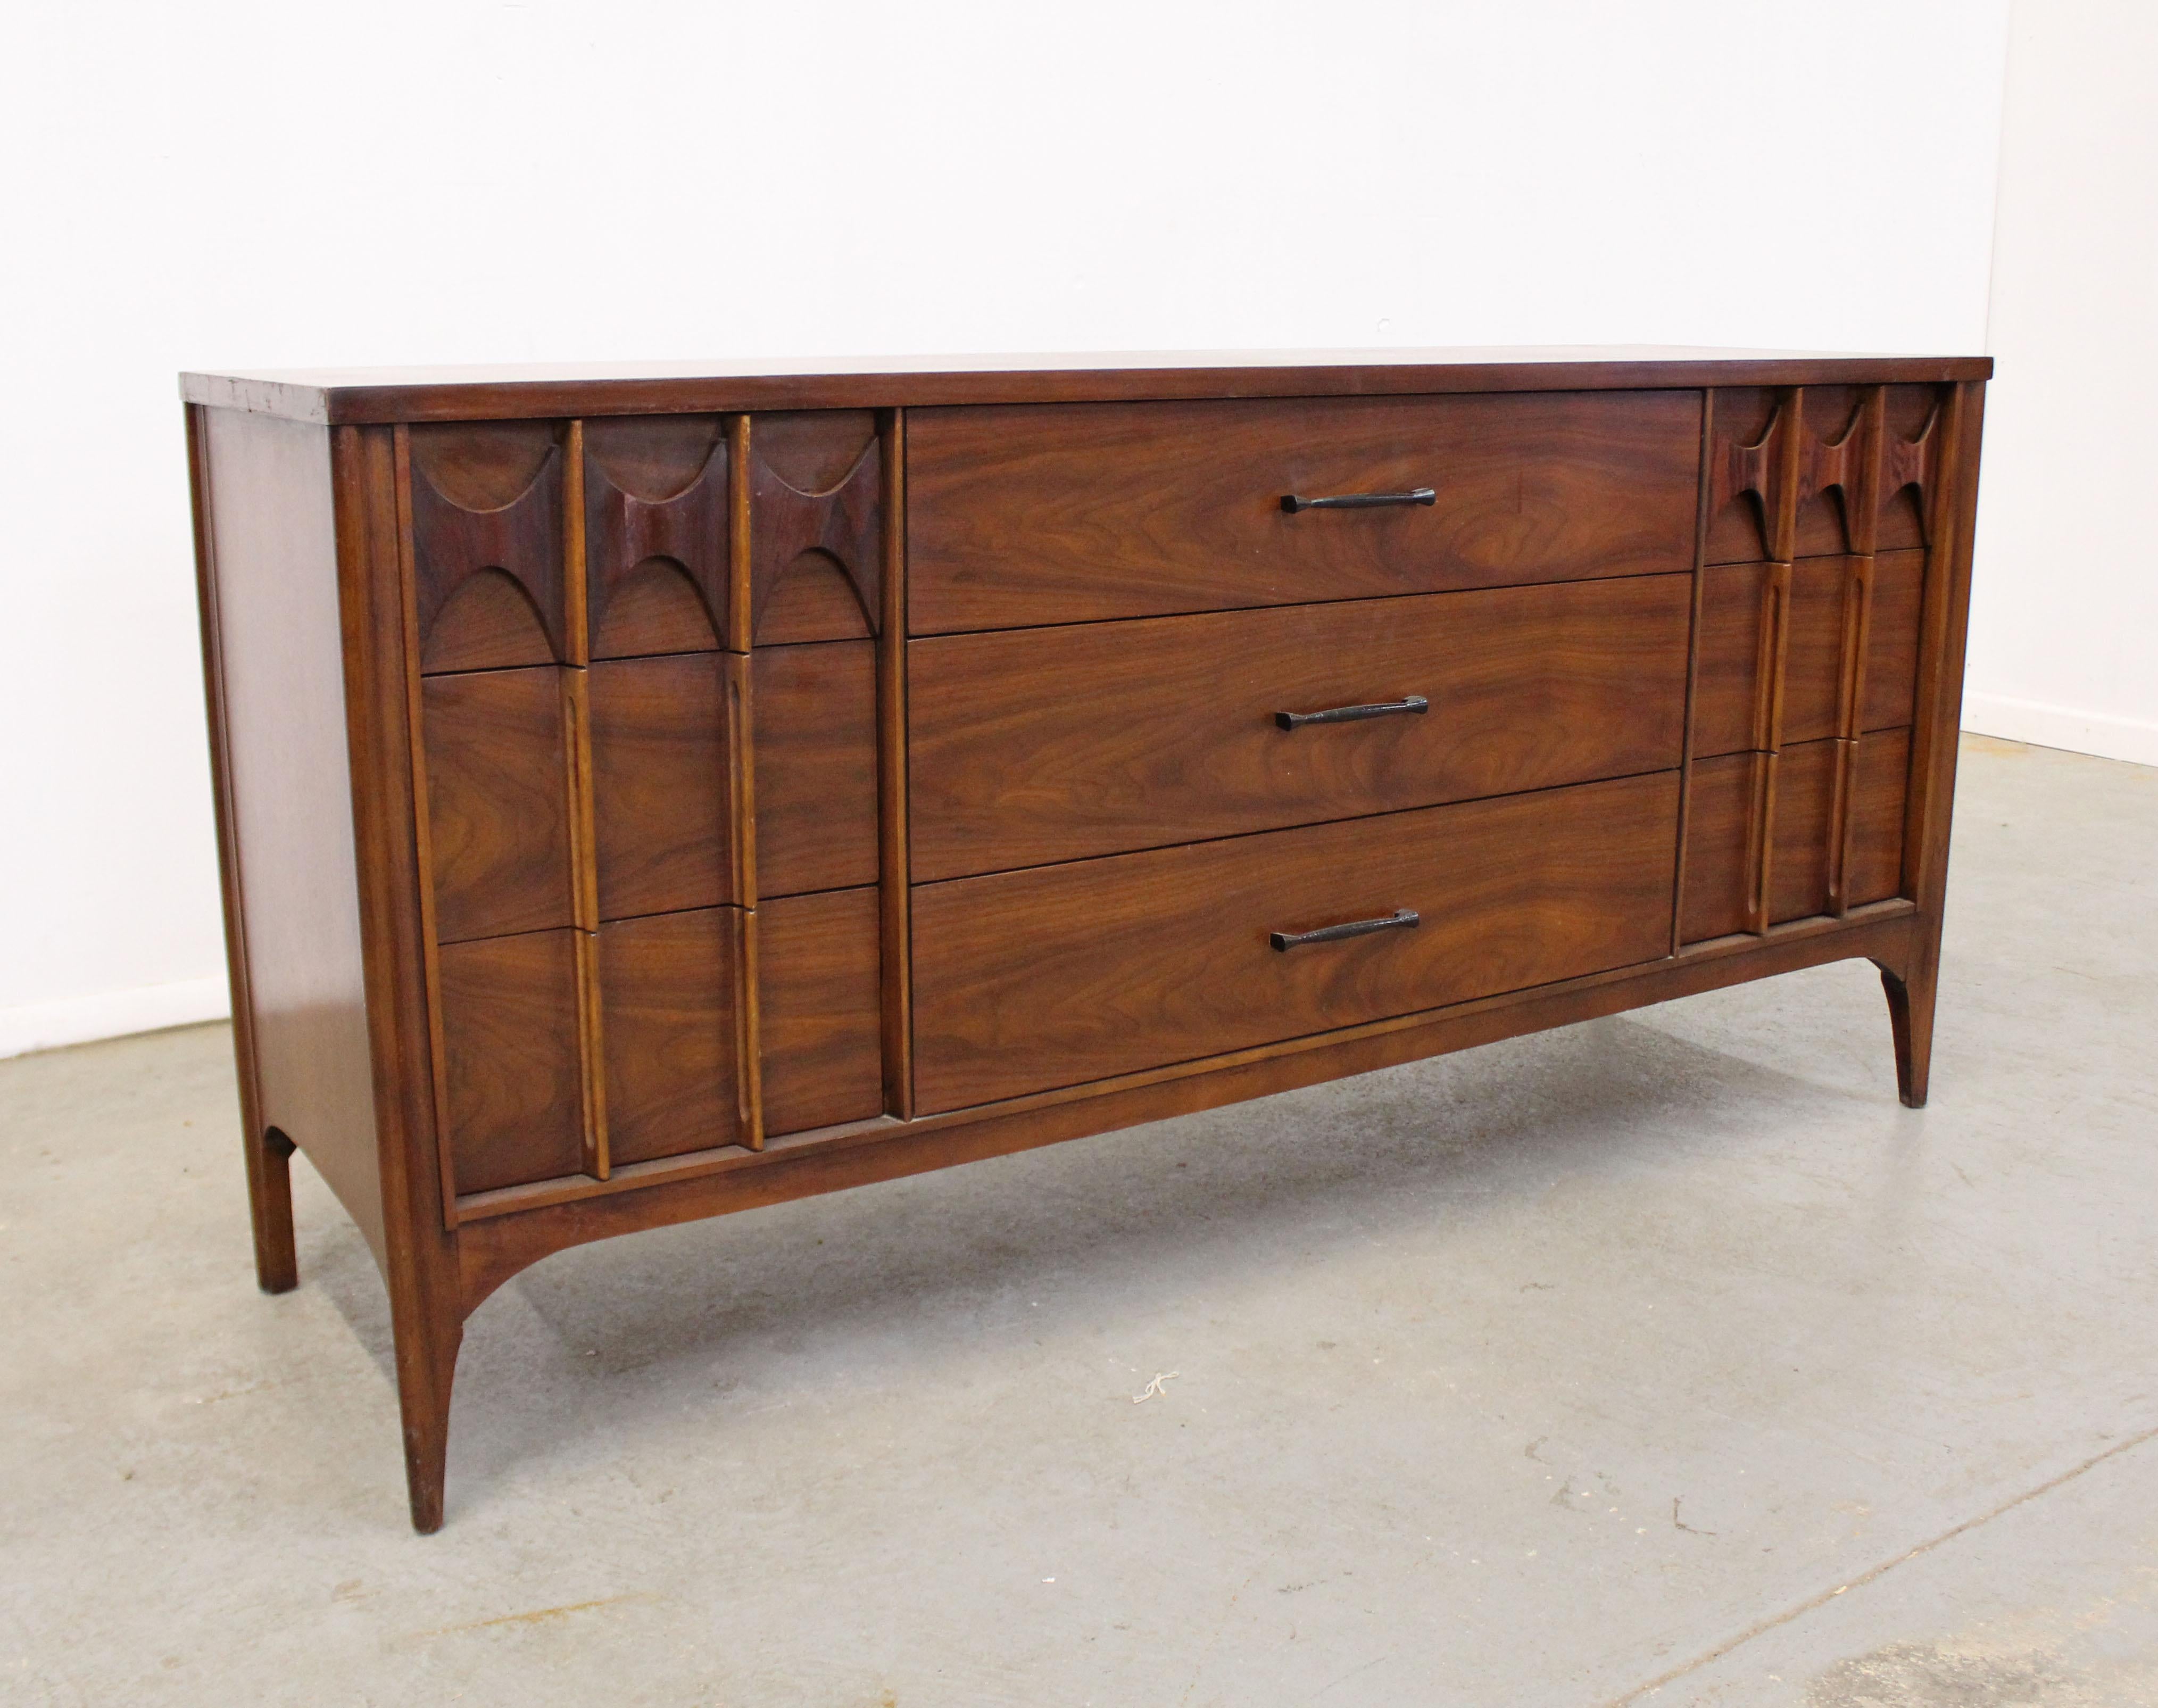 Offered is a vintage Mid-Century Modern credenza made by Kent Coffey 